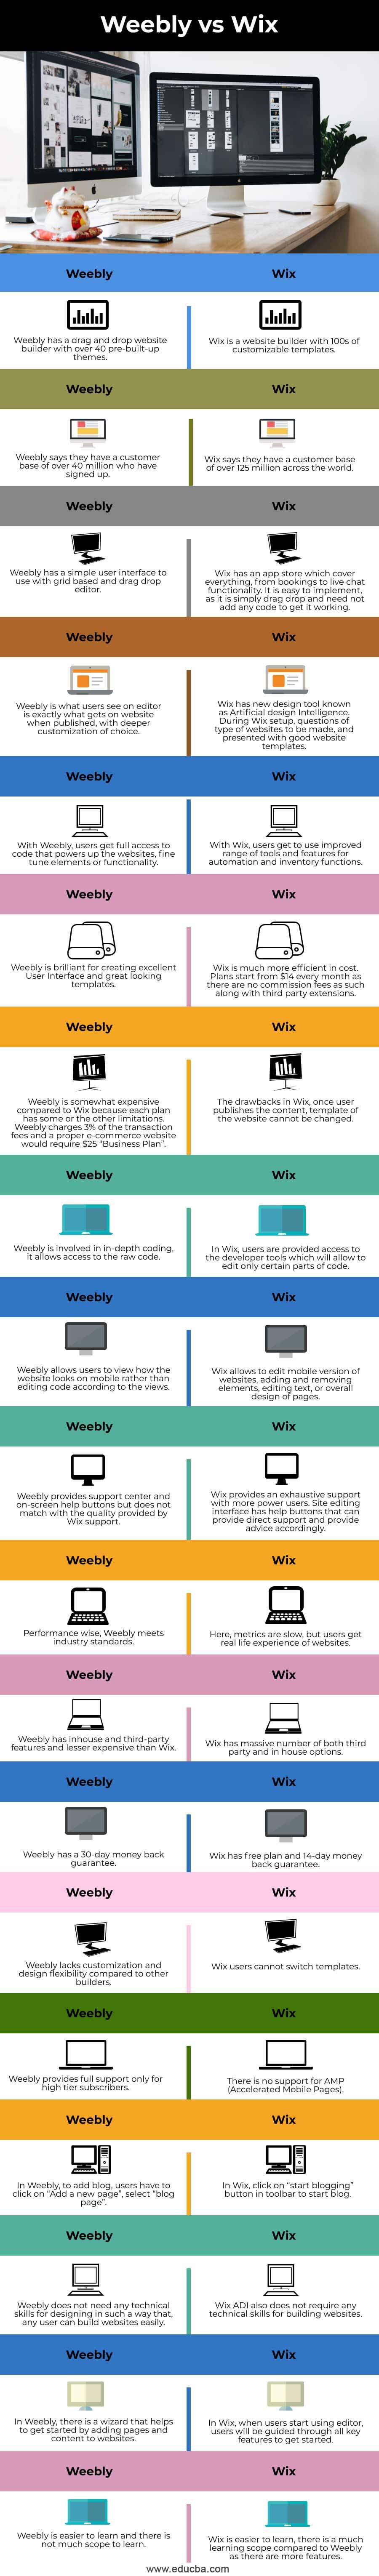 Weebly-vs-Wix-info